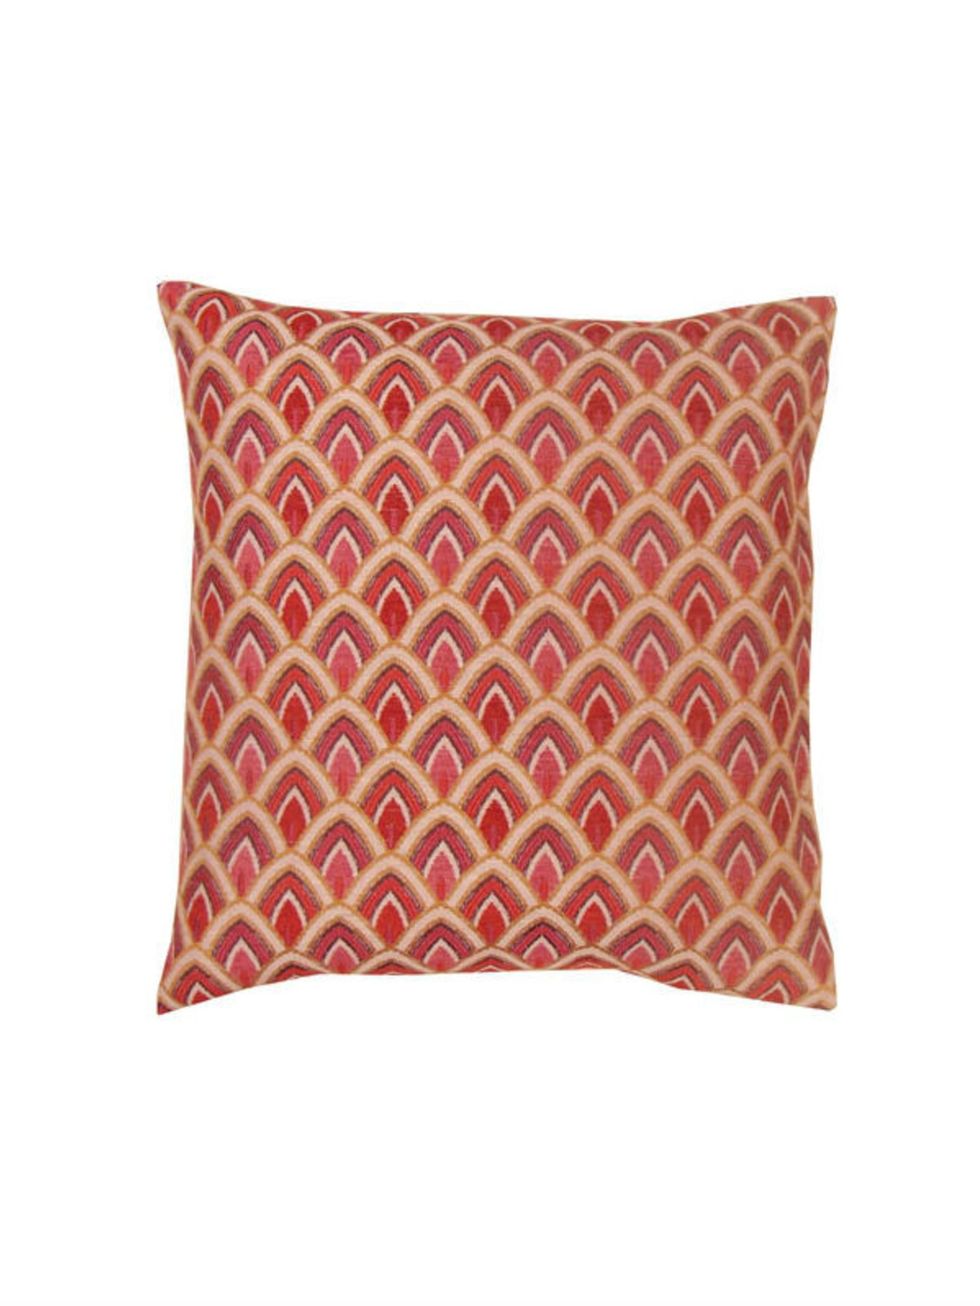 Textile, Cushion, Red, Pillow, Throw pillow, Orange, Rectangle, Linens, Home accessories, Maroon, 